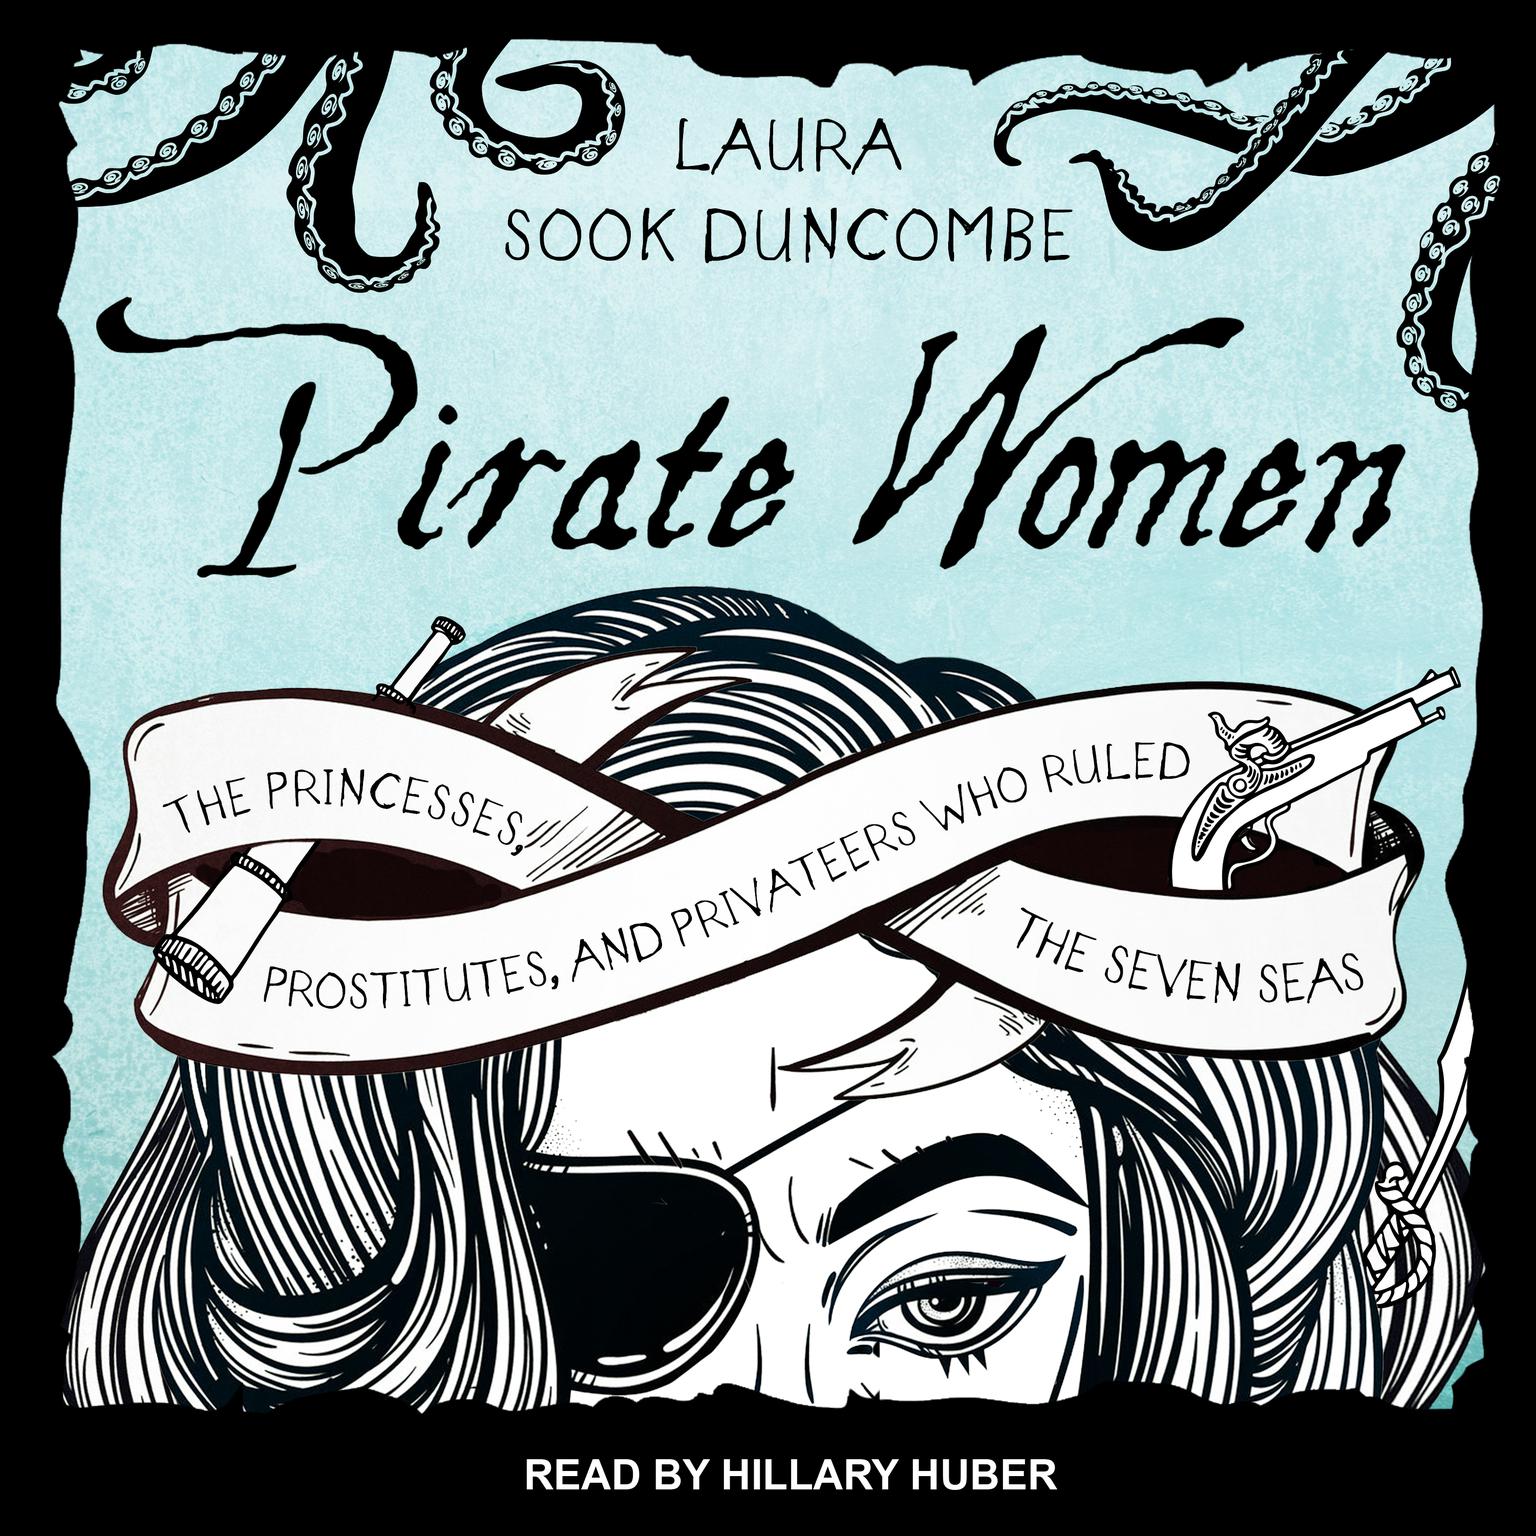 Pirate Women: The Princesses, Prostitutes, and Privateers Who Ruled the Seven Seas Audiobook, by Laura Sook Duncombe